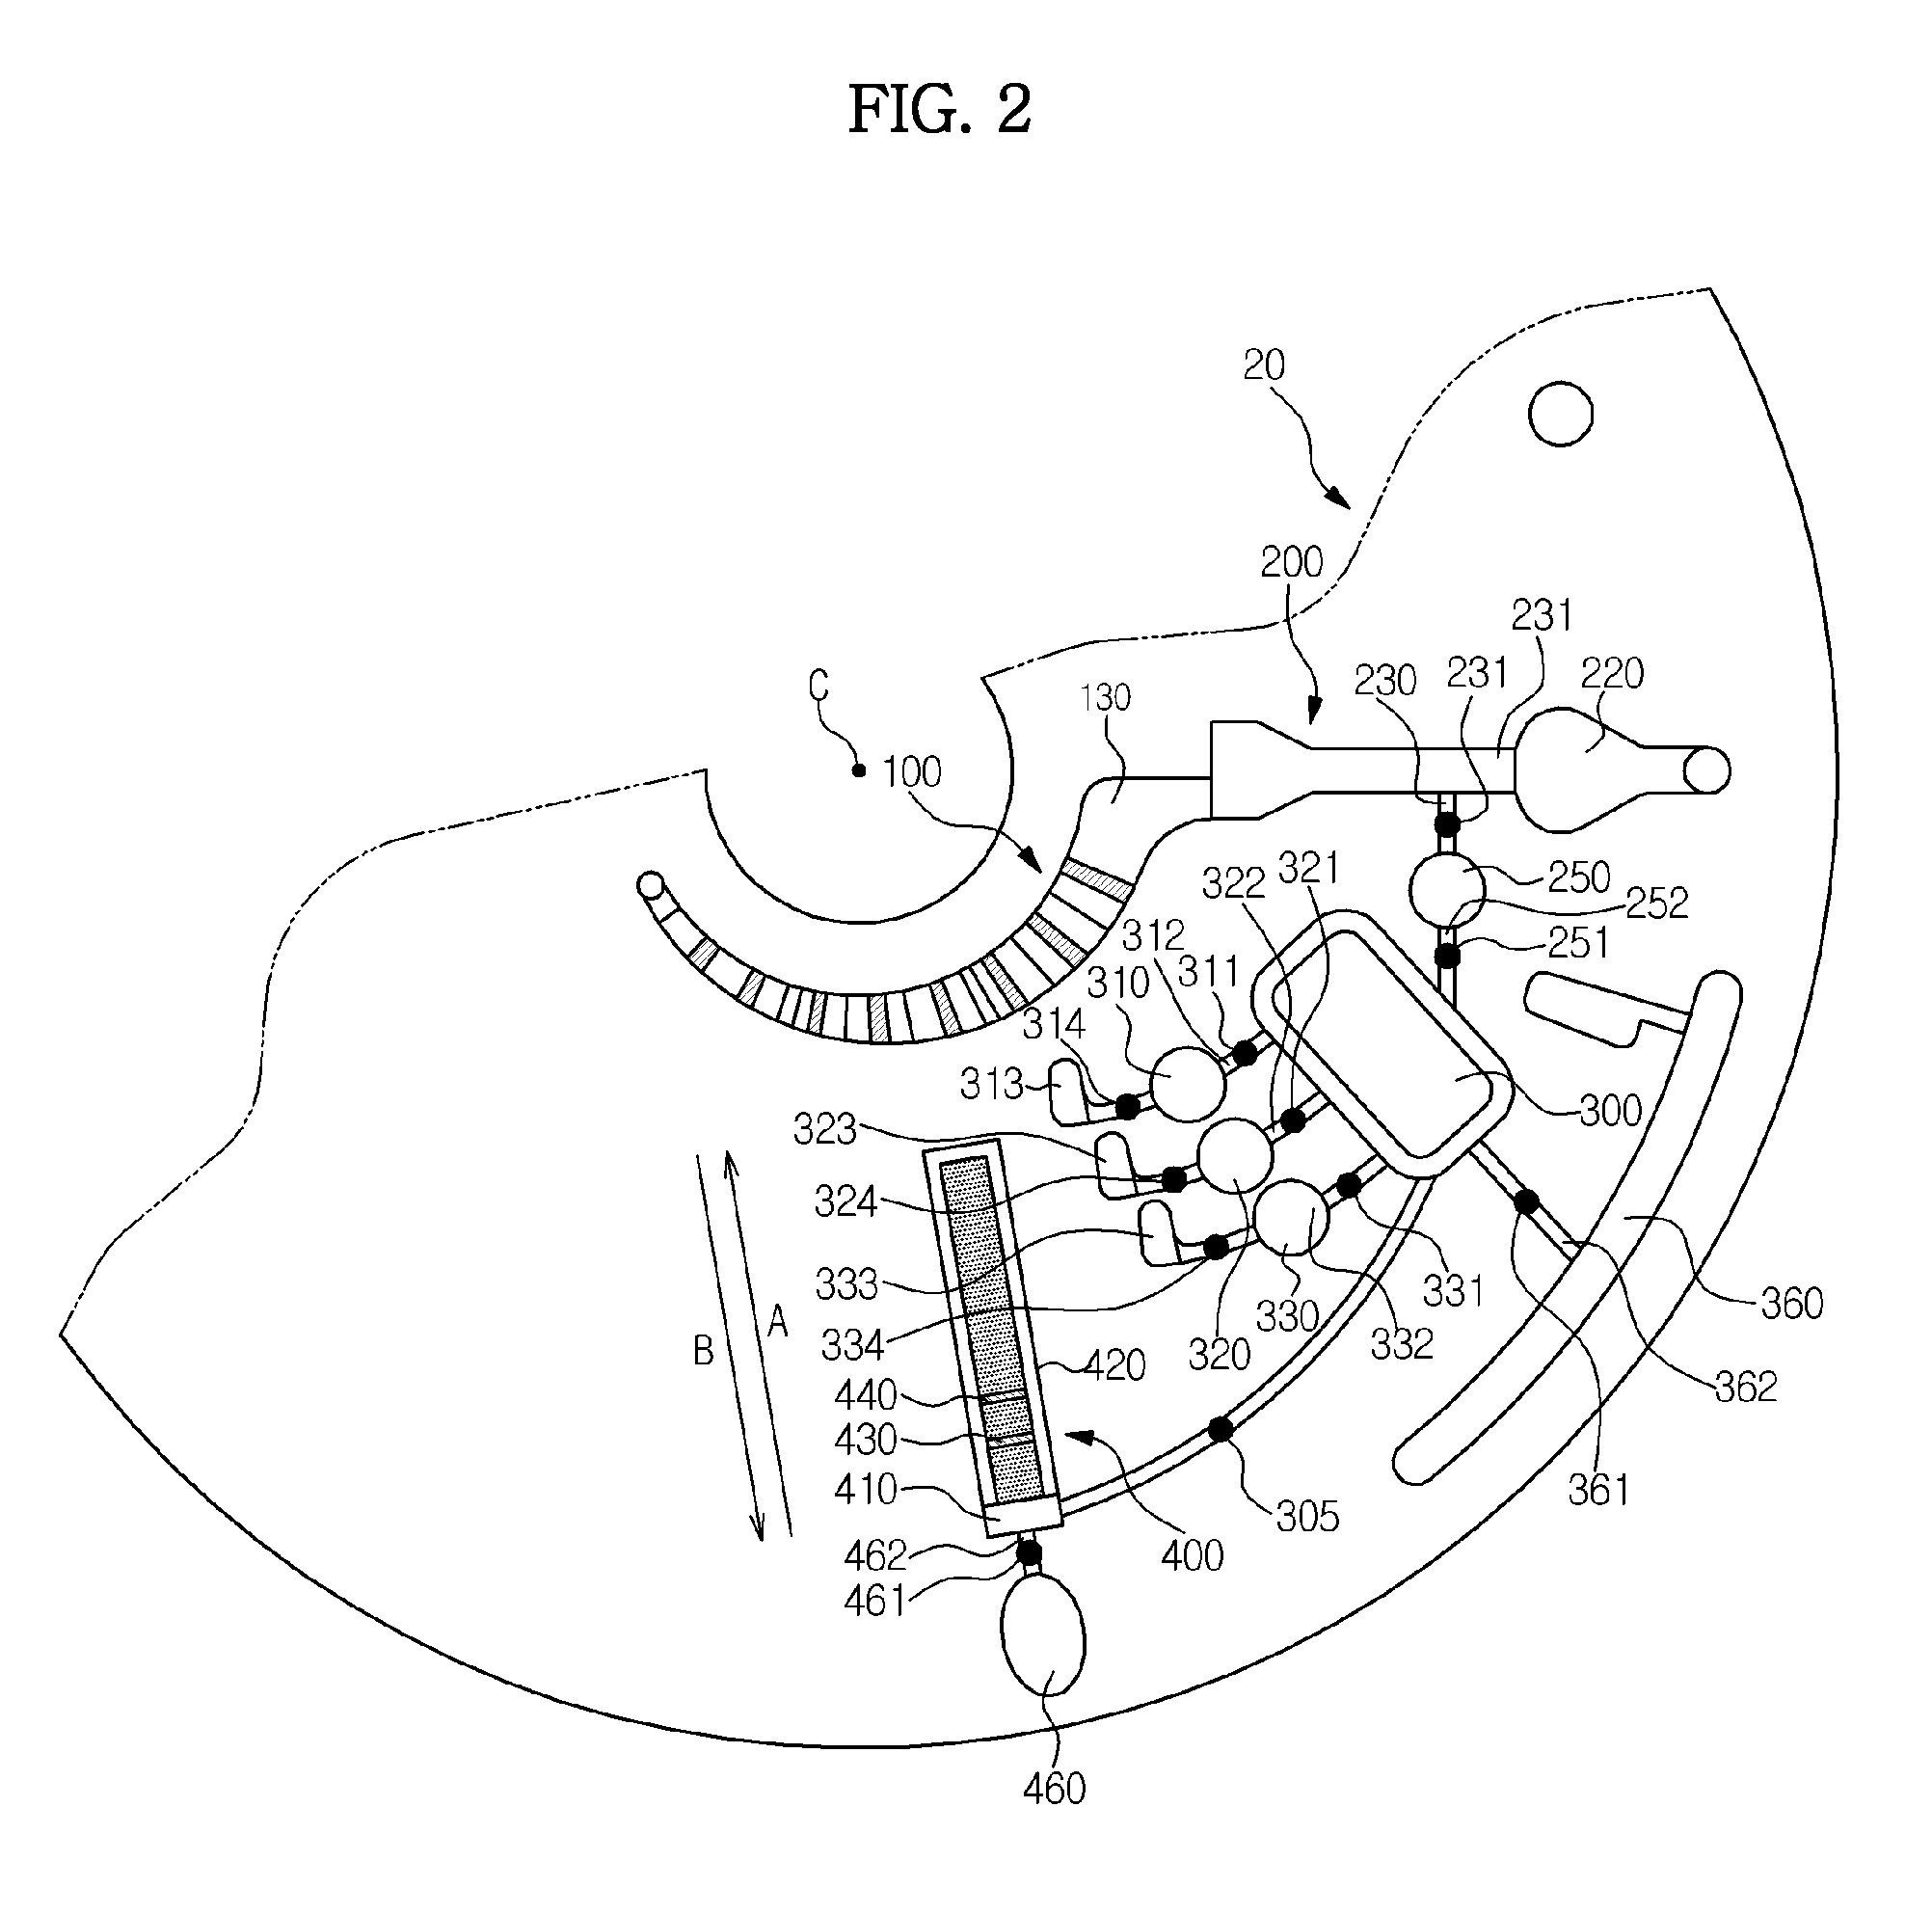 Centrifugal micro-fluidic device and method for detecting analytes from liquid specimen